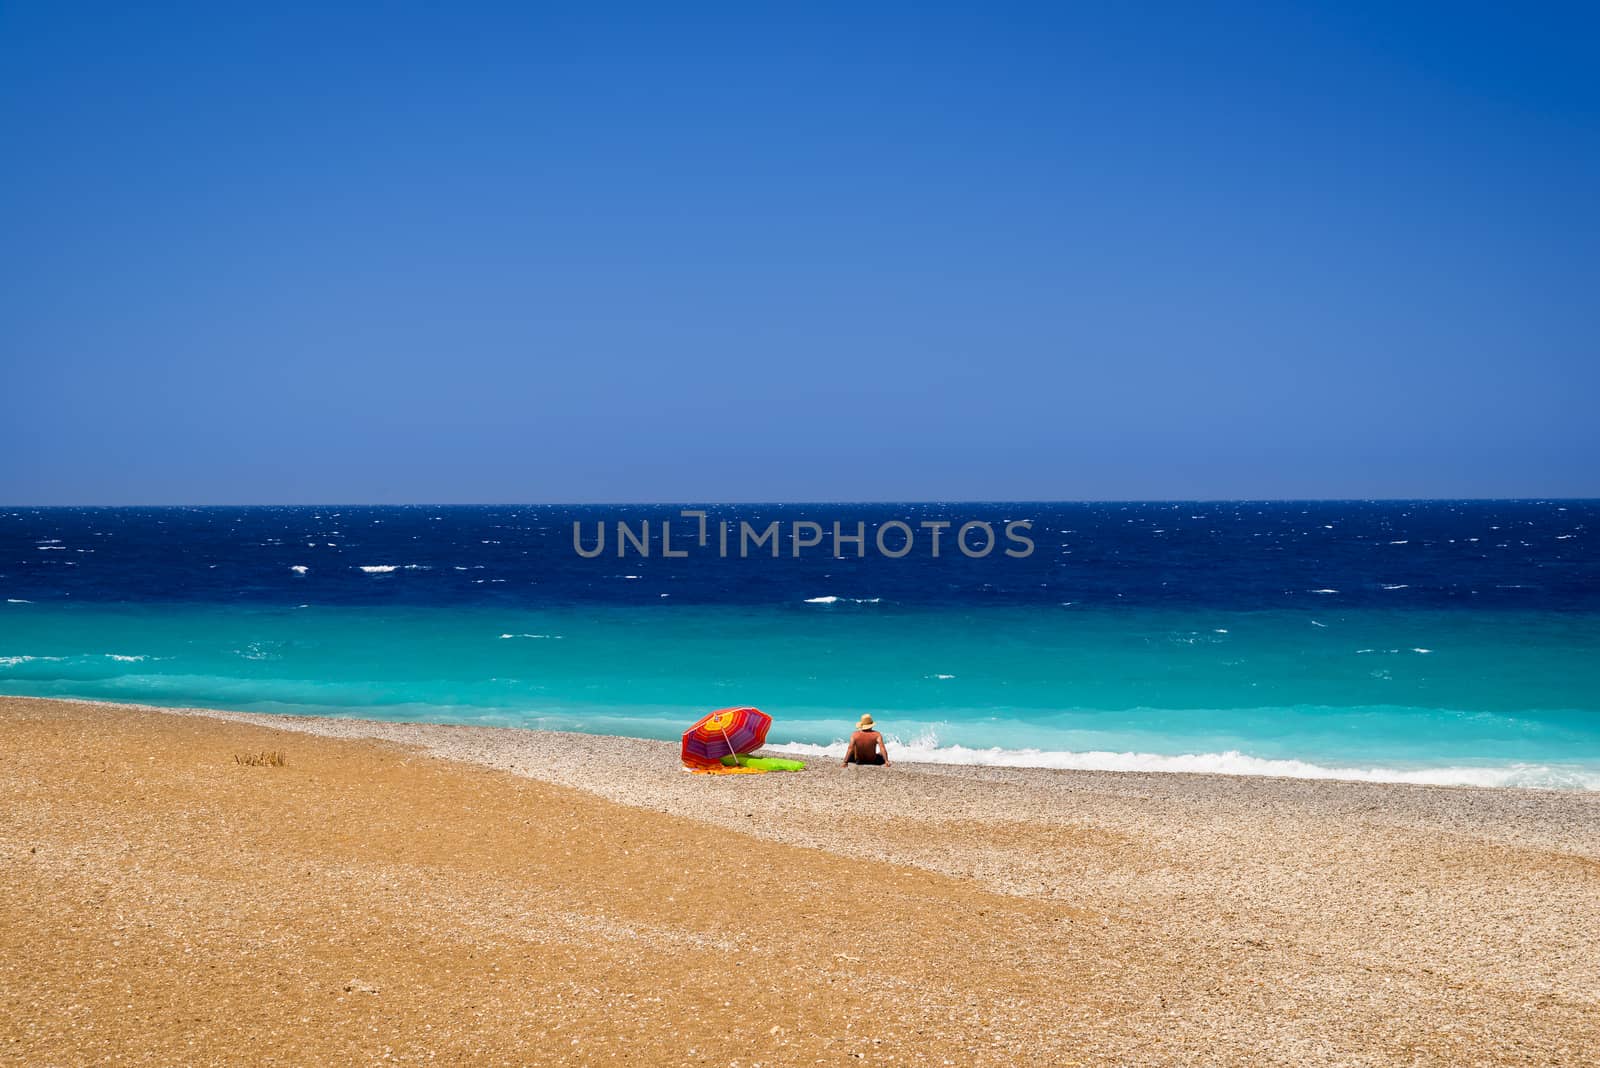 Sunbather calmly relaxing by the Deep Blue Seas at the North tip of Rhodes where the Aegean and Mediterranean Meet